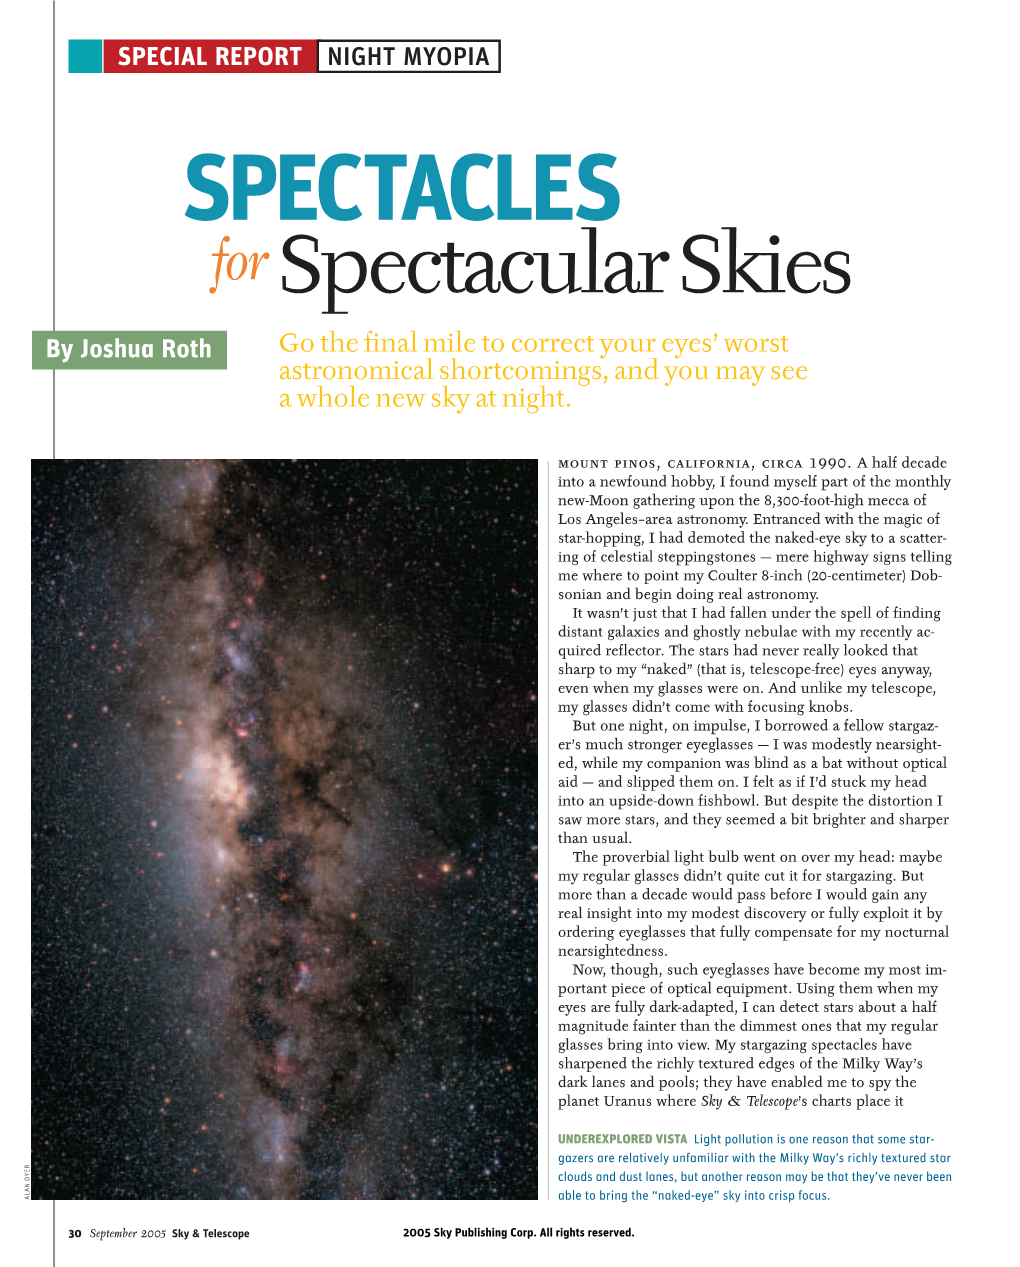 SPECTACLES for Spectacular Skies